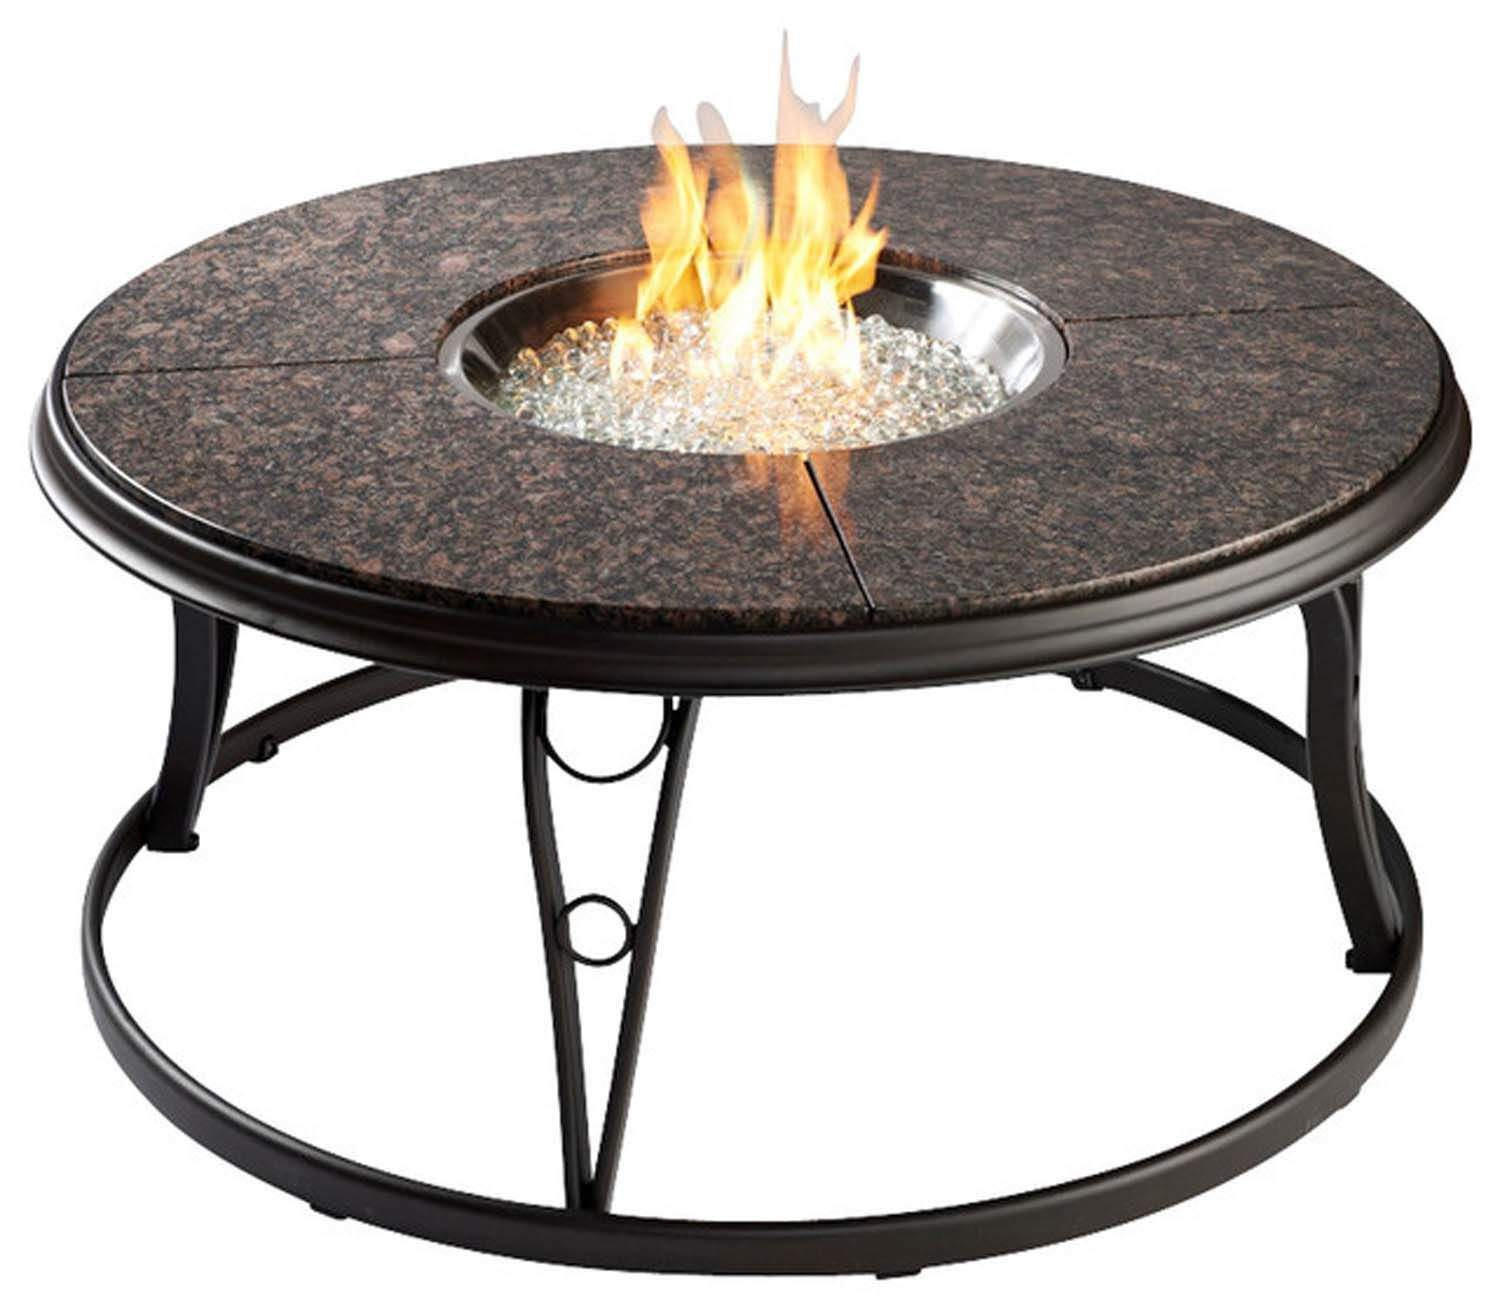 Patio Table With Firepit
 Outdoor Greatroom Granite 42 Inch Round Gas Fire Pit Table